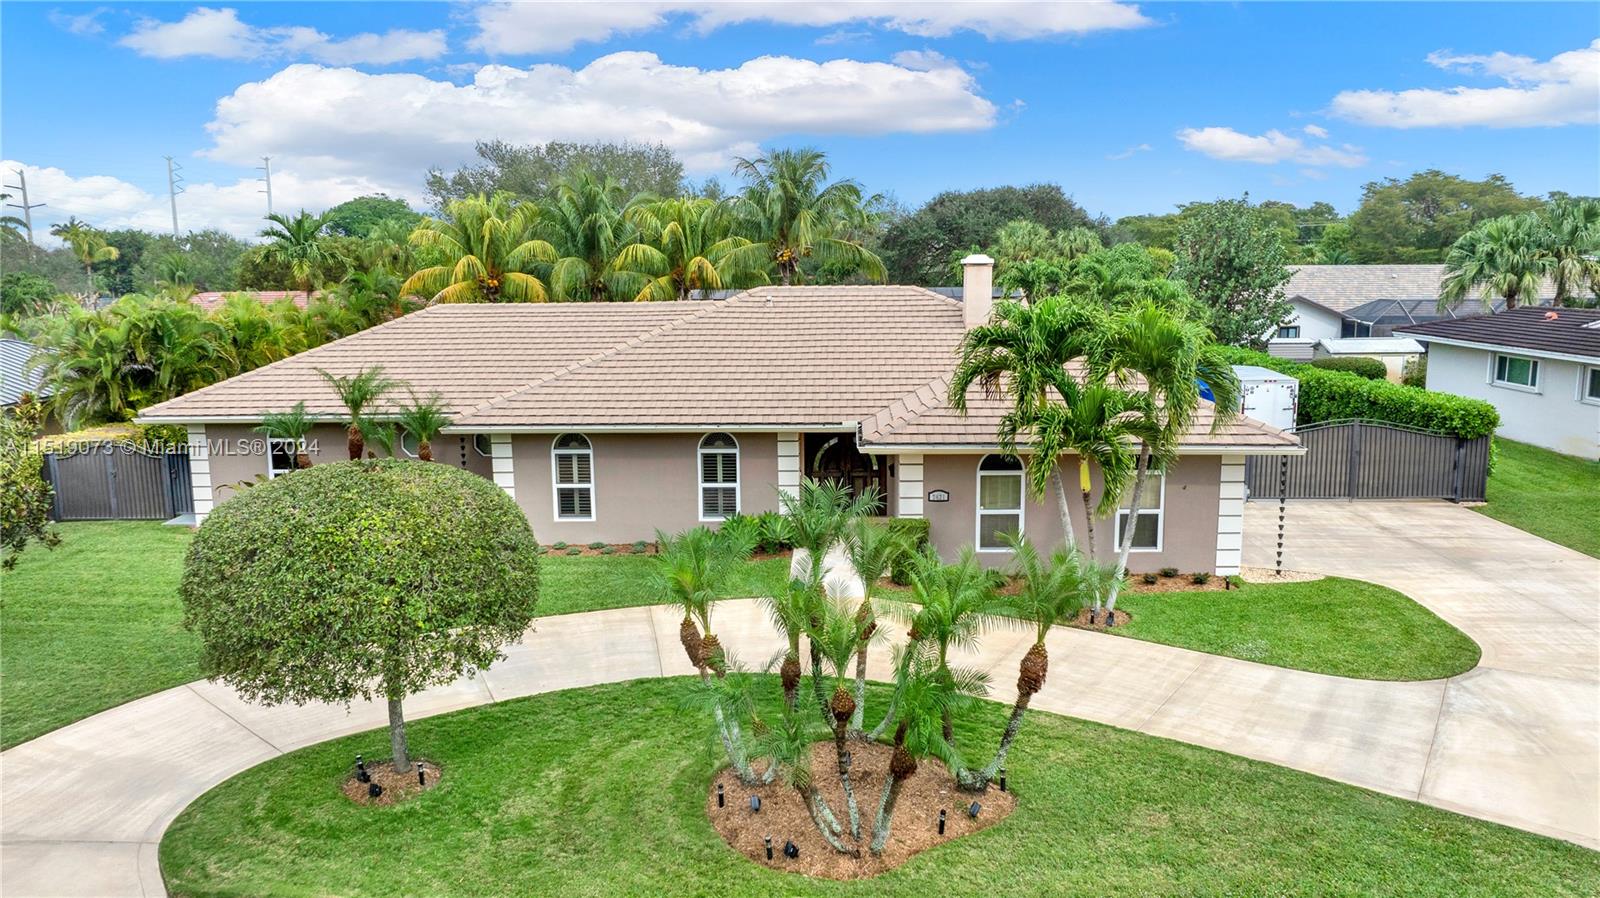 North Palmetto Bay Pristine! Tucked away on a private street near Old Cutler Road, this well-built 4/2.5 Hollub Home is the bright & spacious move-in-ready family home you’ve been looking for. Meticulously cared for & recently painted inside & out, special features include impact windows/doors, flat tile roof, Trane AC, solid mahogany entry door, plantation shutters, updated cabana bathrooms, wood-burning fireplace, & side RV/boat parking. Formal living/dining room, eat-in bar top kitchen, & spacious family room overlook the travertine pool deck, tongue and groove covered patio, and oversized backyard perfect for indoor/outdoor living & entertaining. Near Coral Reef Park, & top-rated public/private schools. Who is ready to call this fantastic house and neighborhood, home?